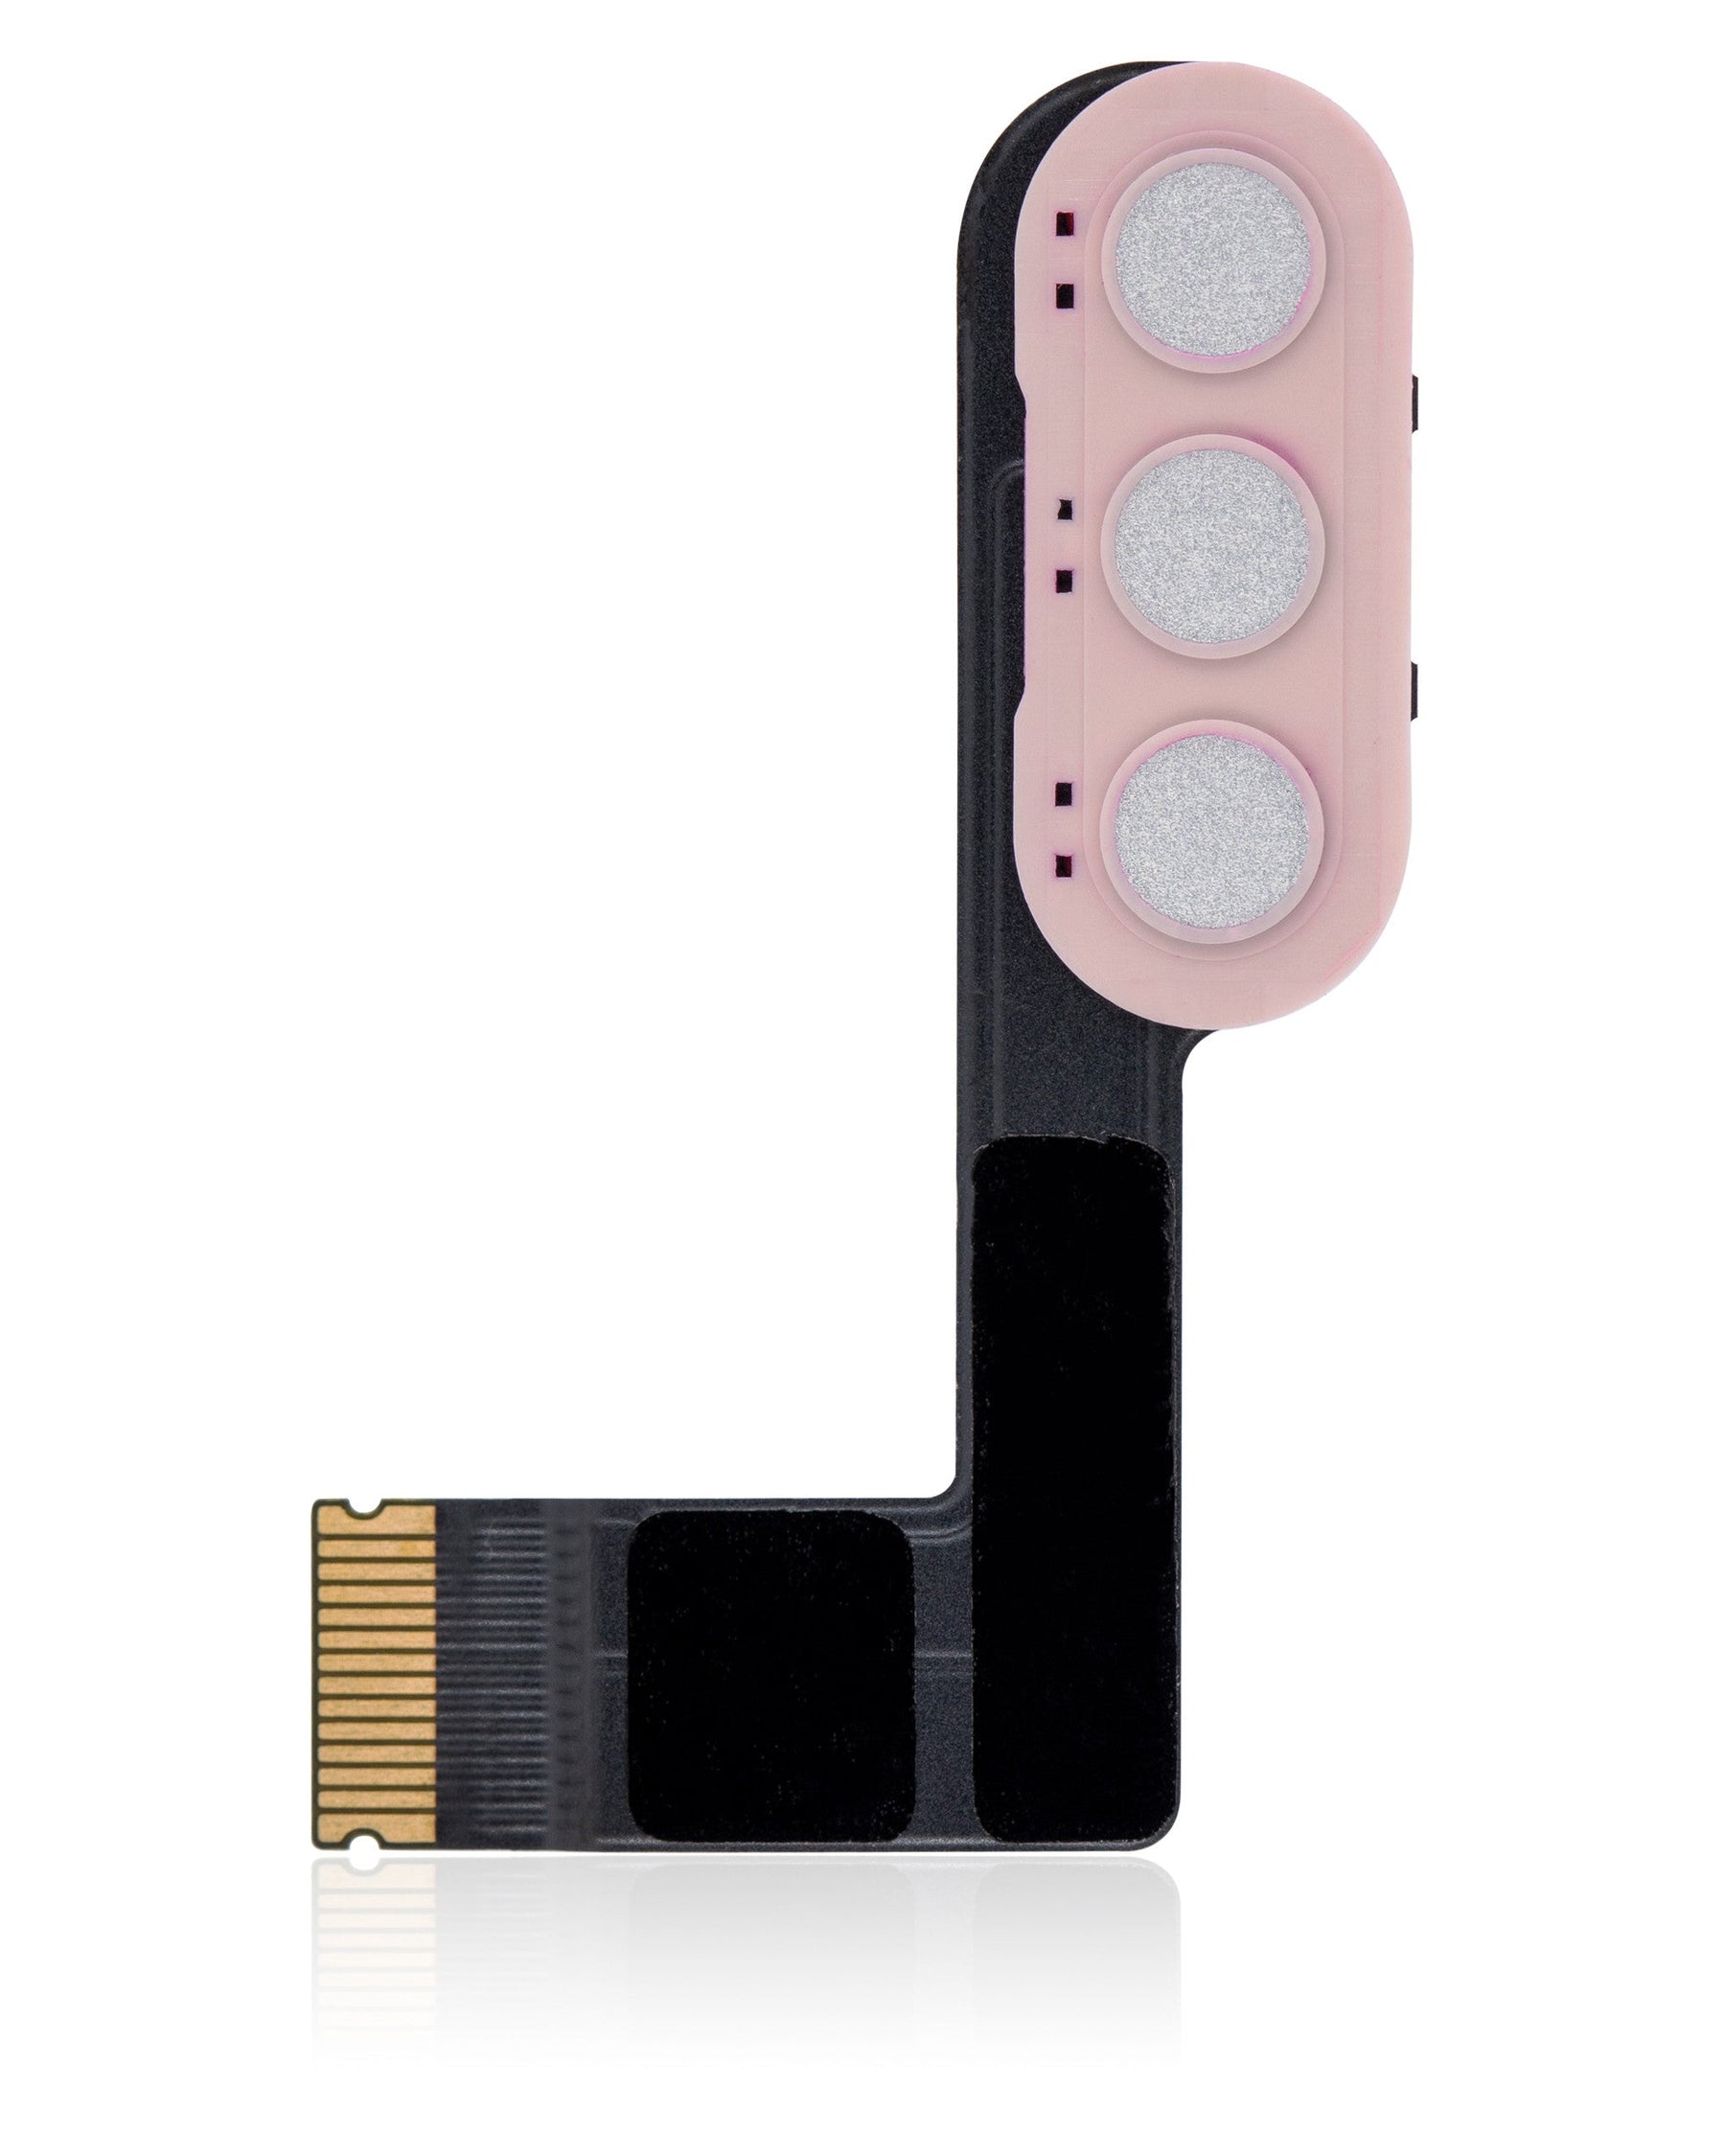 KEYBOARD FLEX CABLE COMPATIBLE FOR IPAD AIR 4/5 - ROSE GOLD